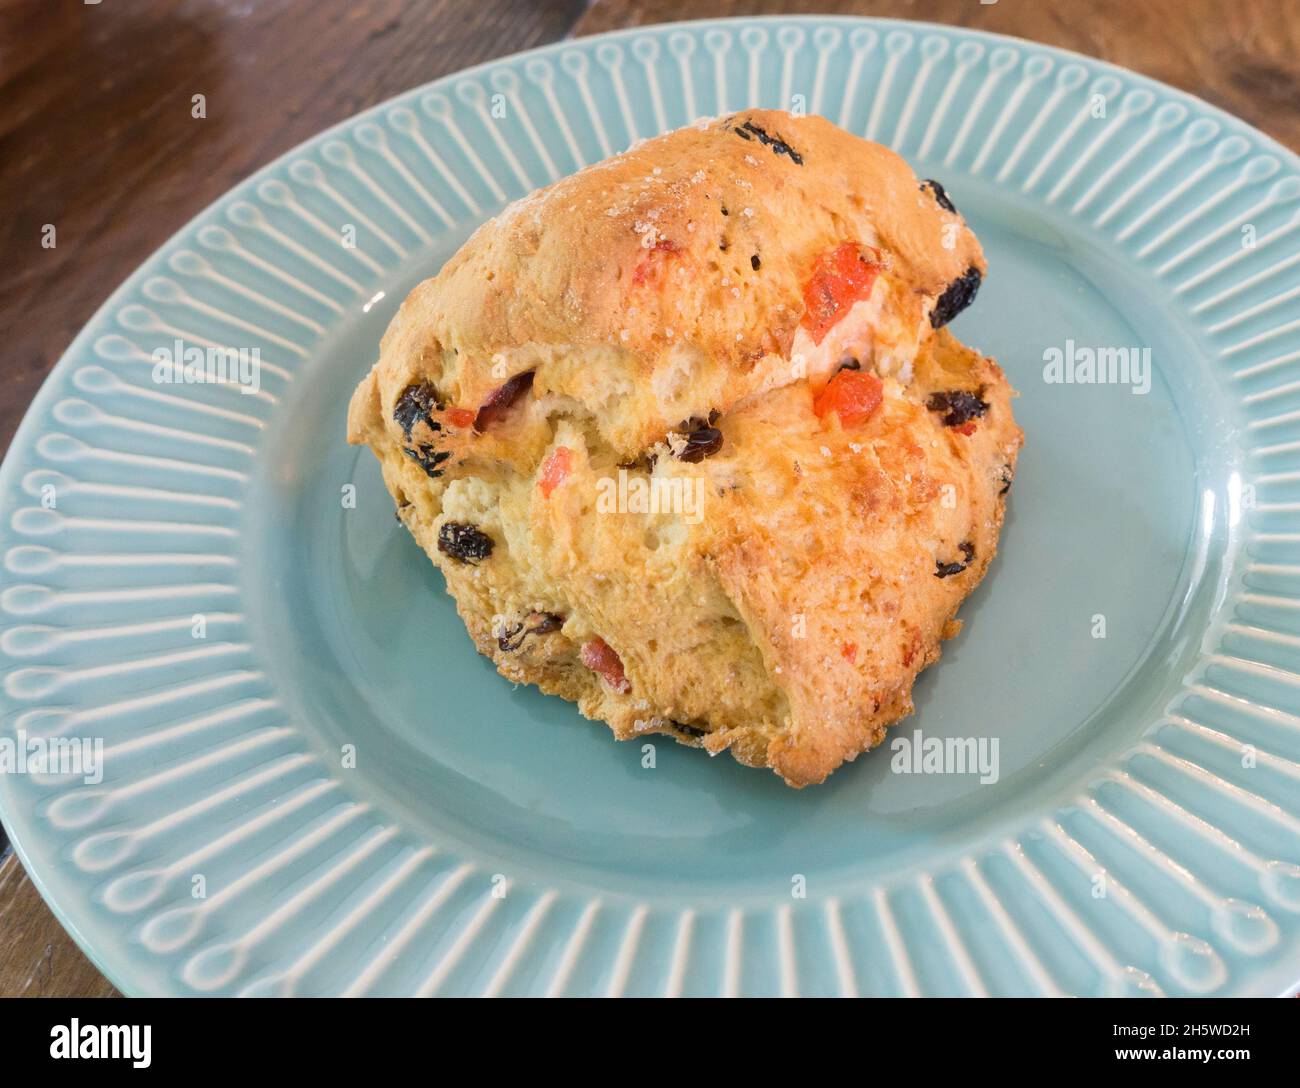 A fruit scone with cherries on a plate. Stock Photo